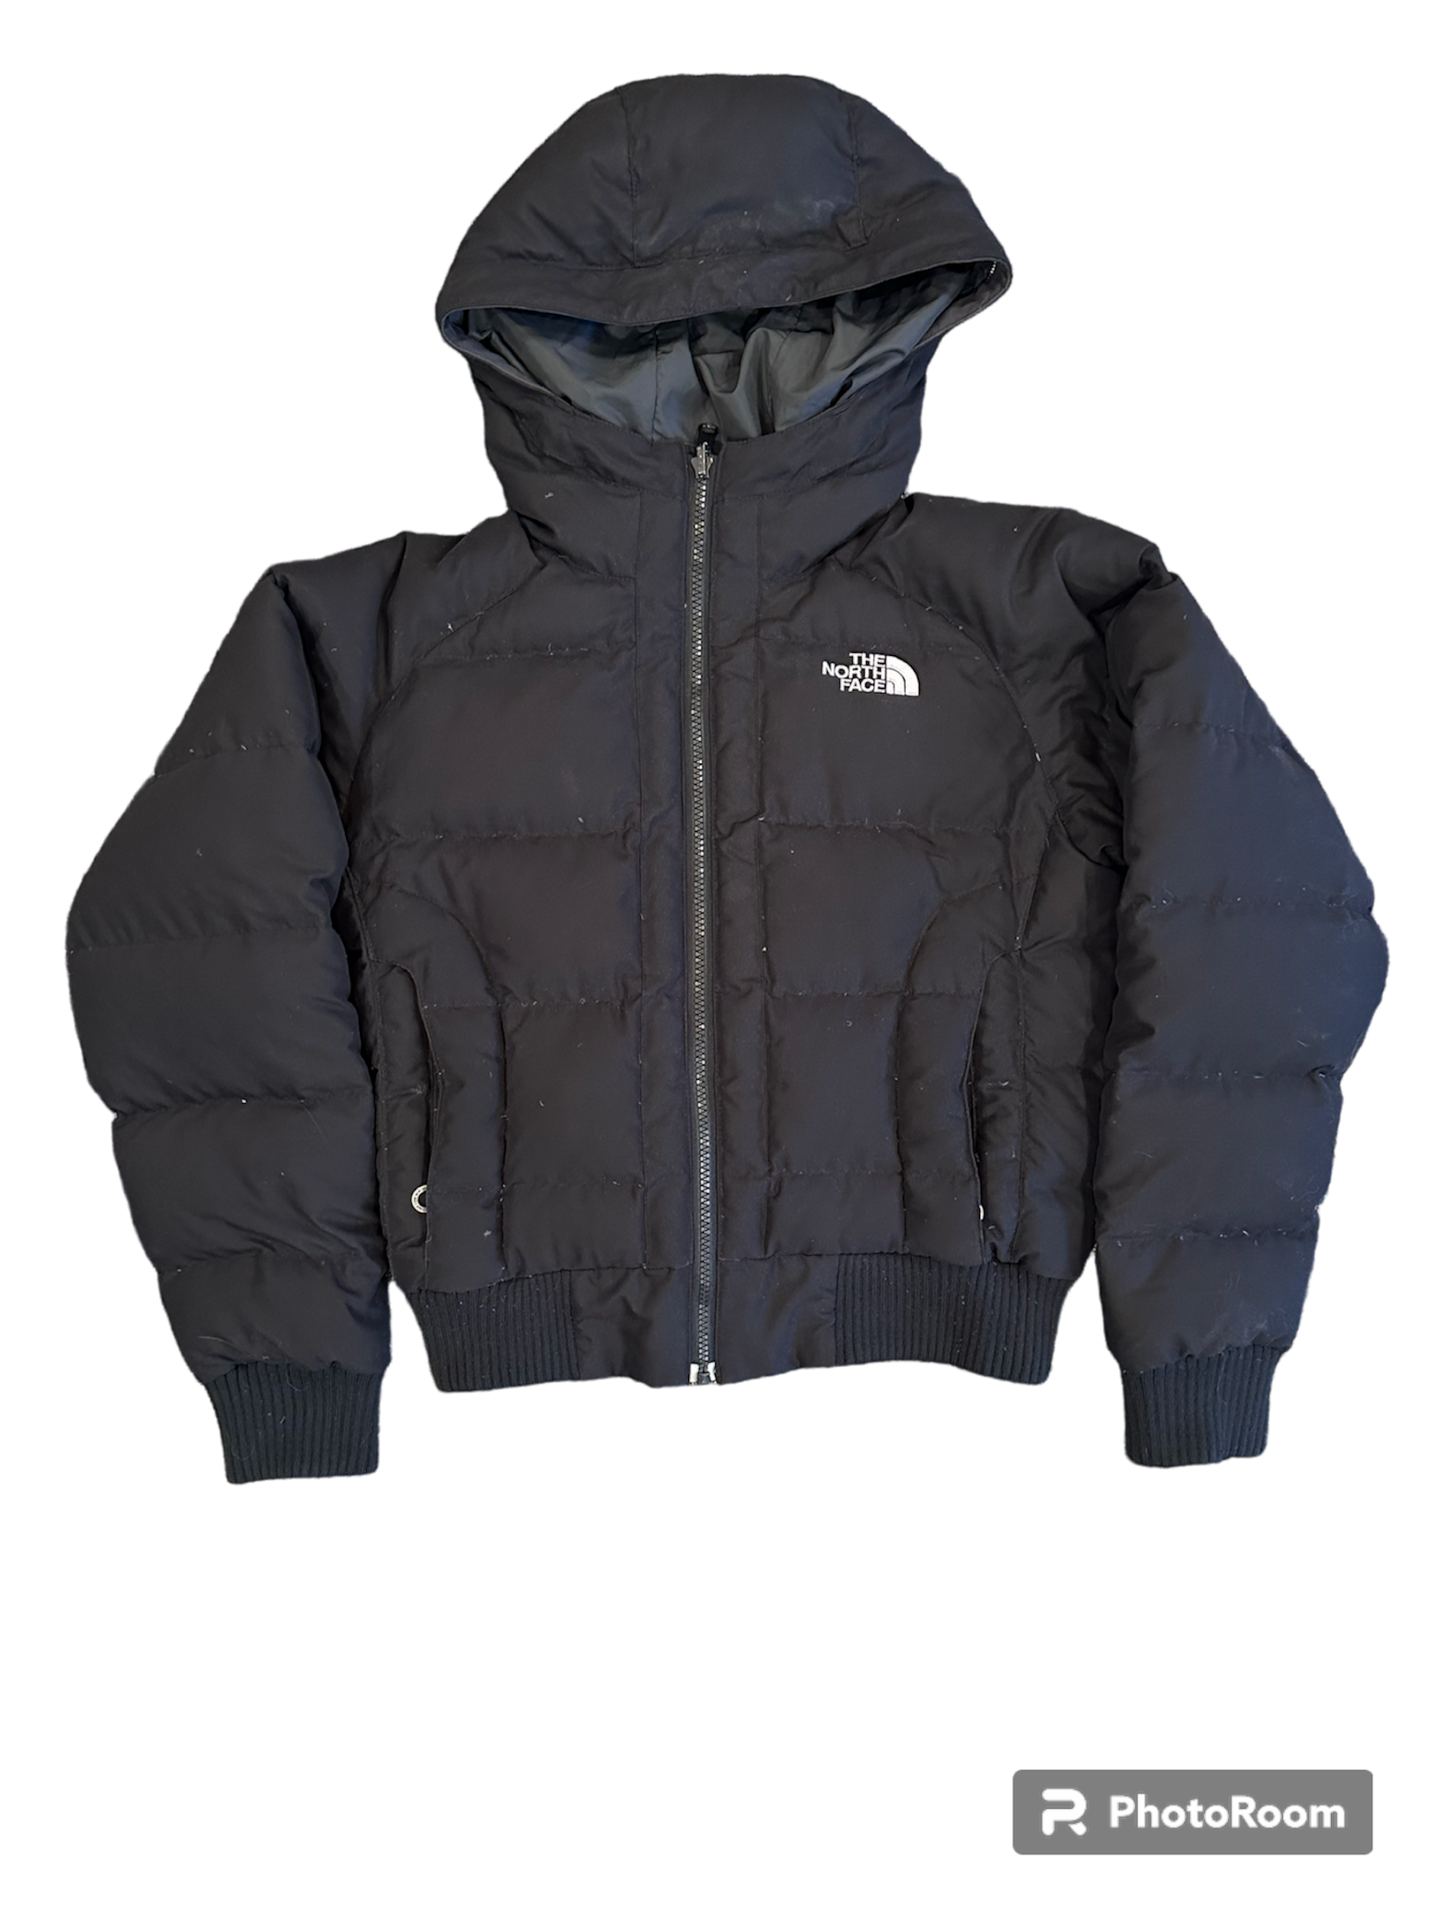 North face puffer jacket – don't sleep vintage